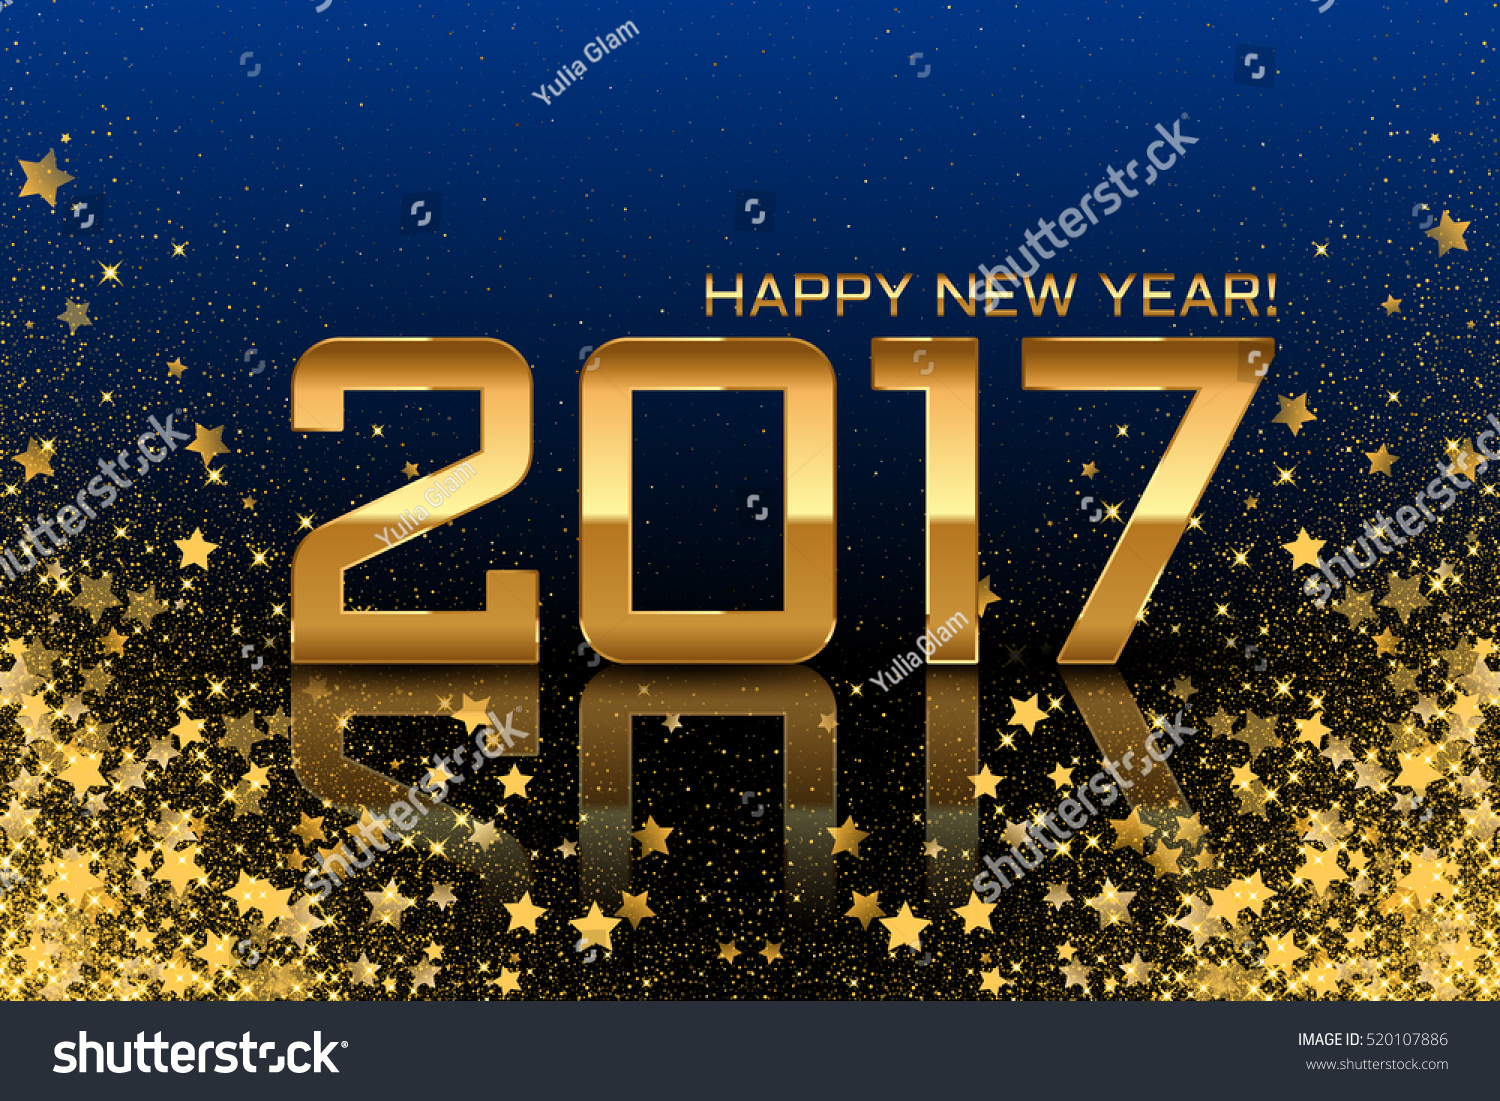 Vector 2017 background with gold stars on blue background #520107886